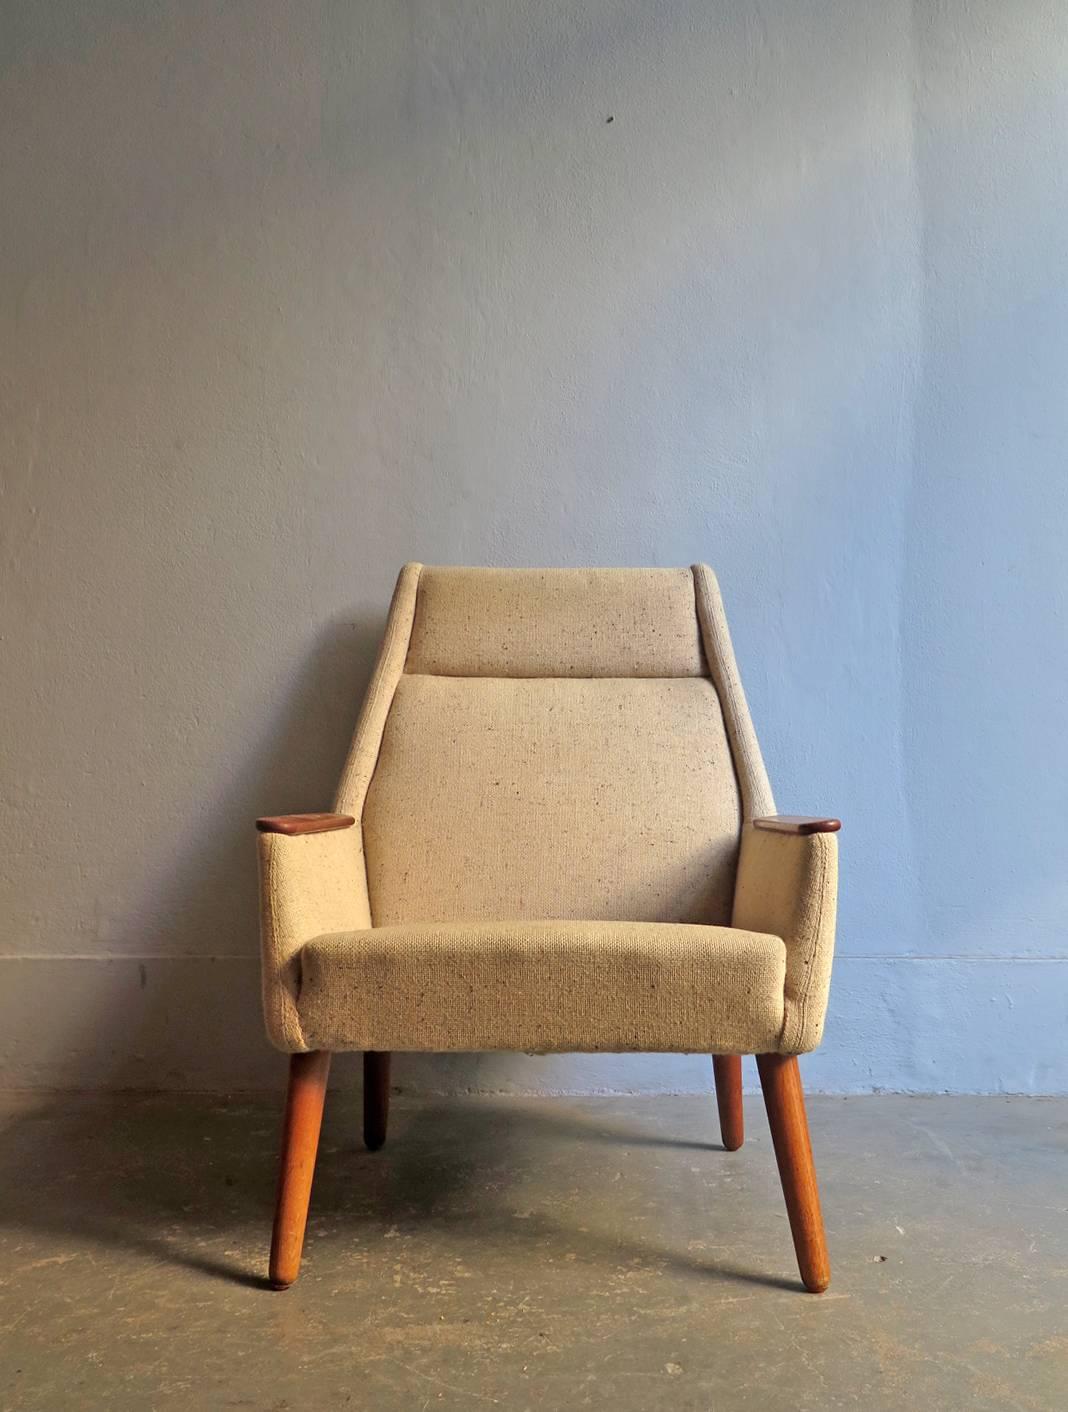 Mid-20th Century Danish Teak and Linen Stylish Easy-Chair For Sale